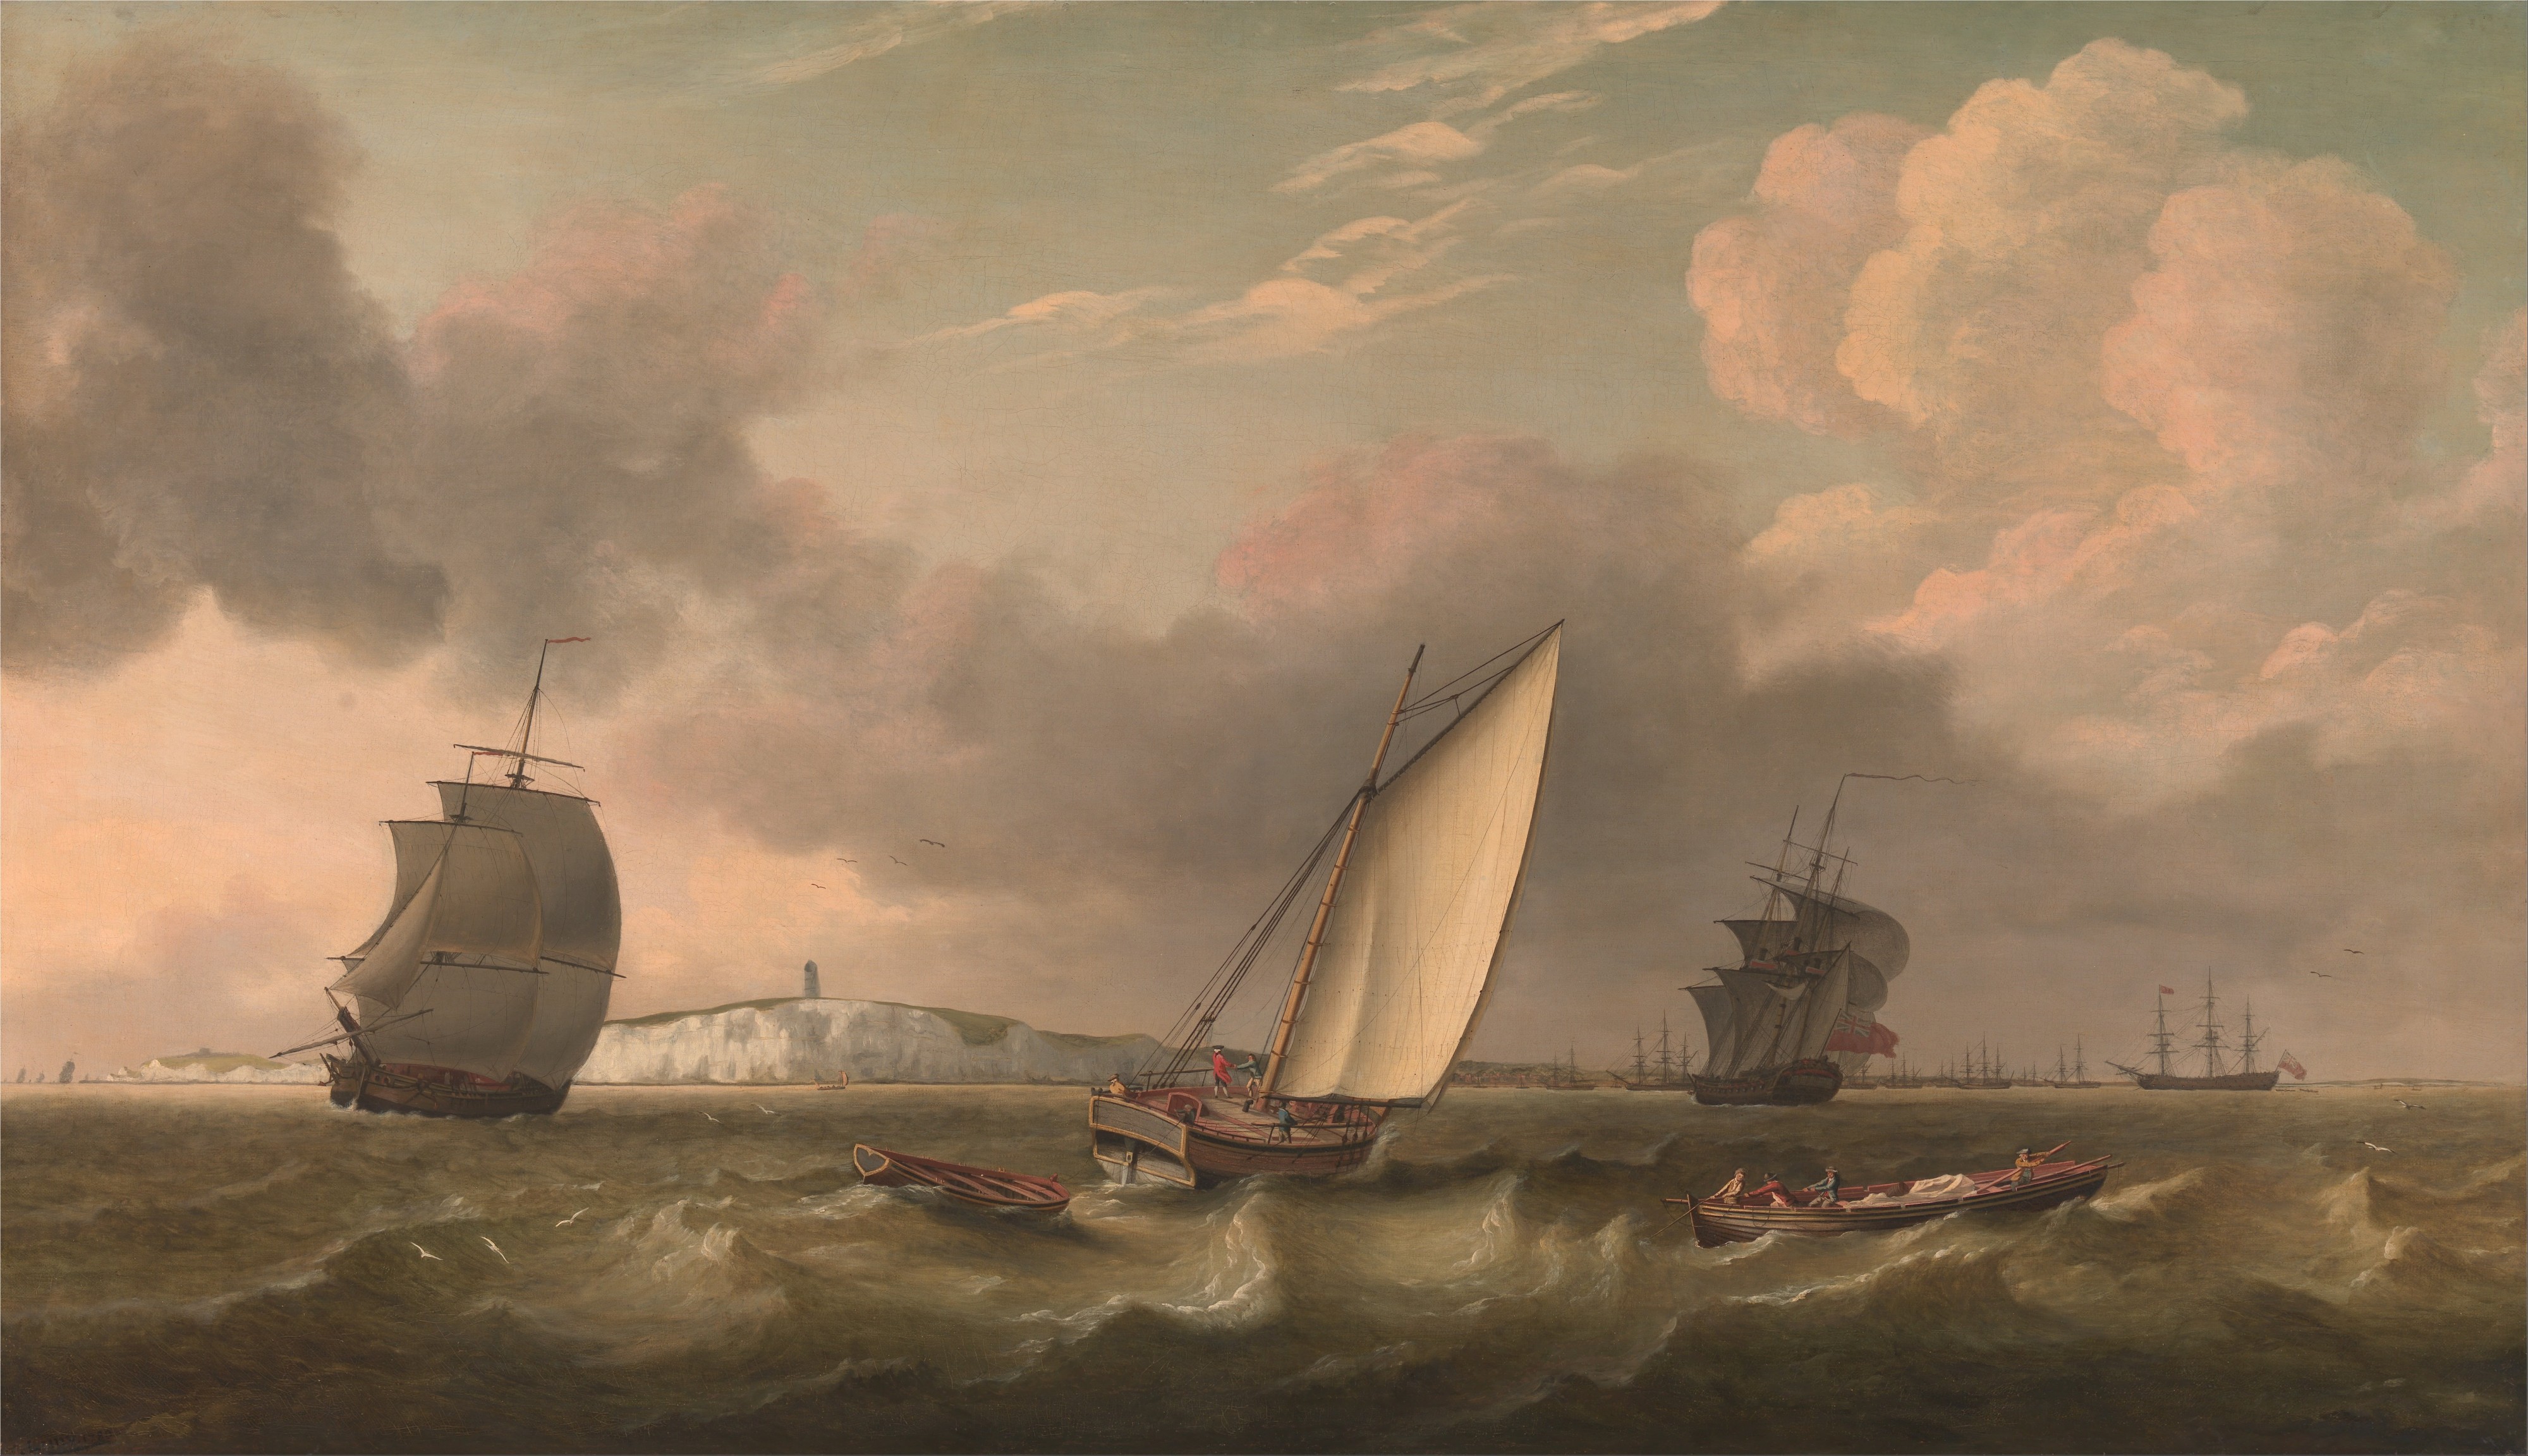 Thomas Luny - A Packet Boat Under Sail in a Breeze off the South Foreland - Google Art Project